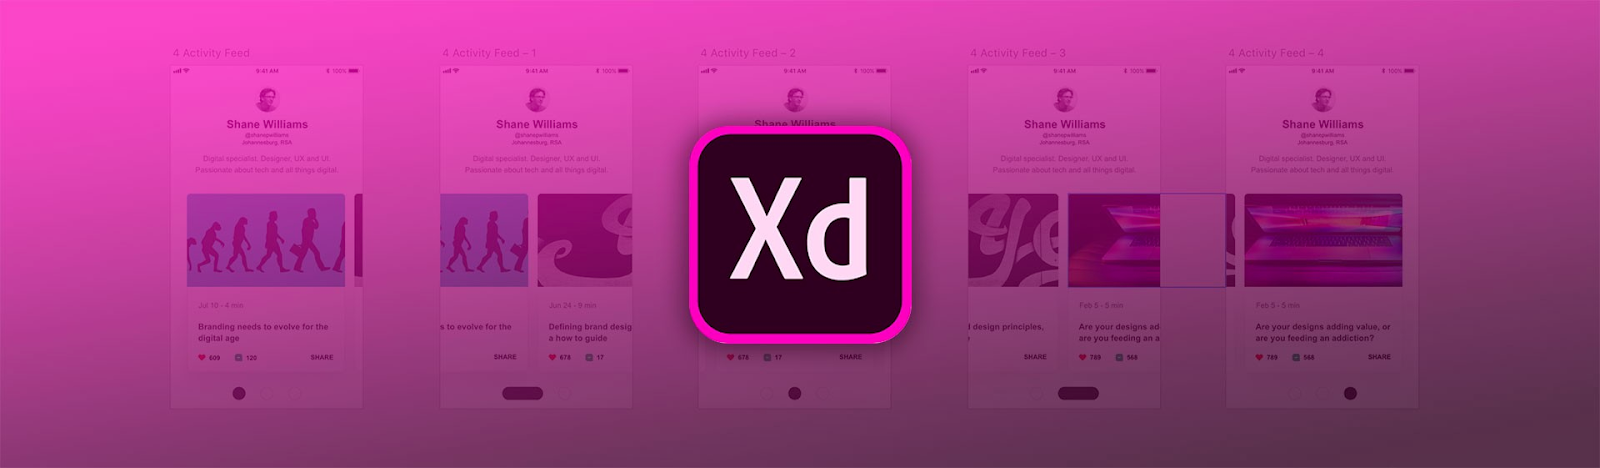 Adobe XD the Ultimate Tool 